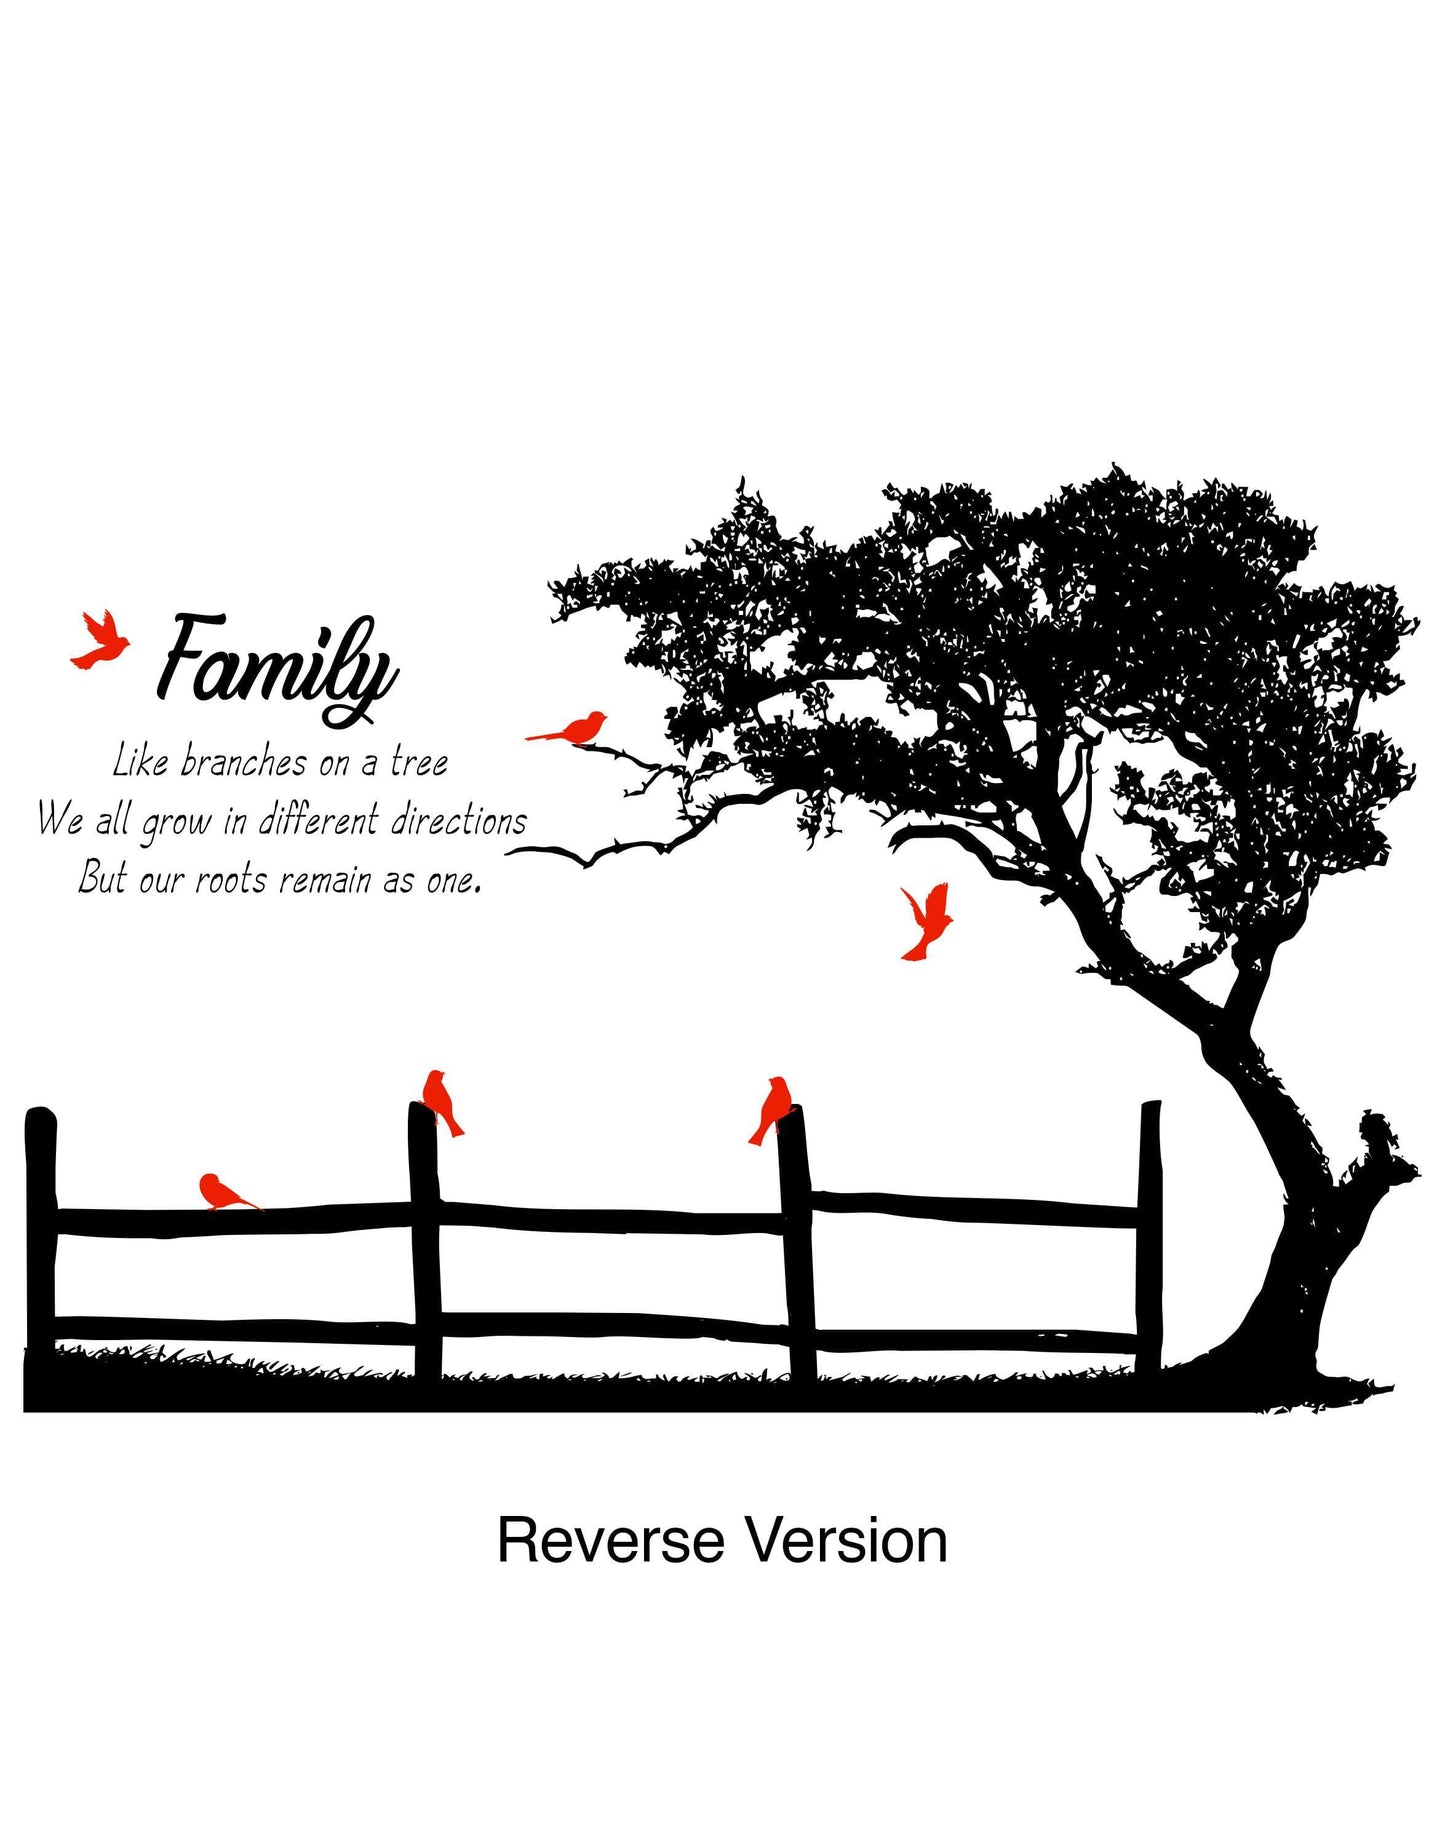 Like Branches on a Tree, We all grow in different directions But our roots remain as one Motivational Family Quote Vinyl Wall Decal. Tree with Birds. #6278